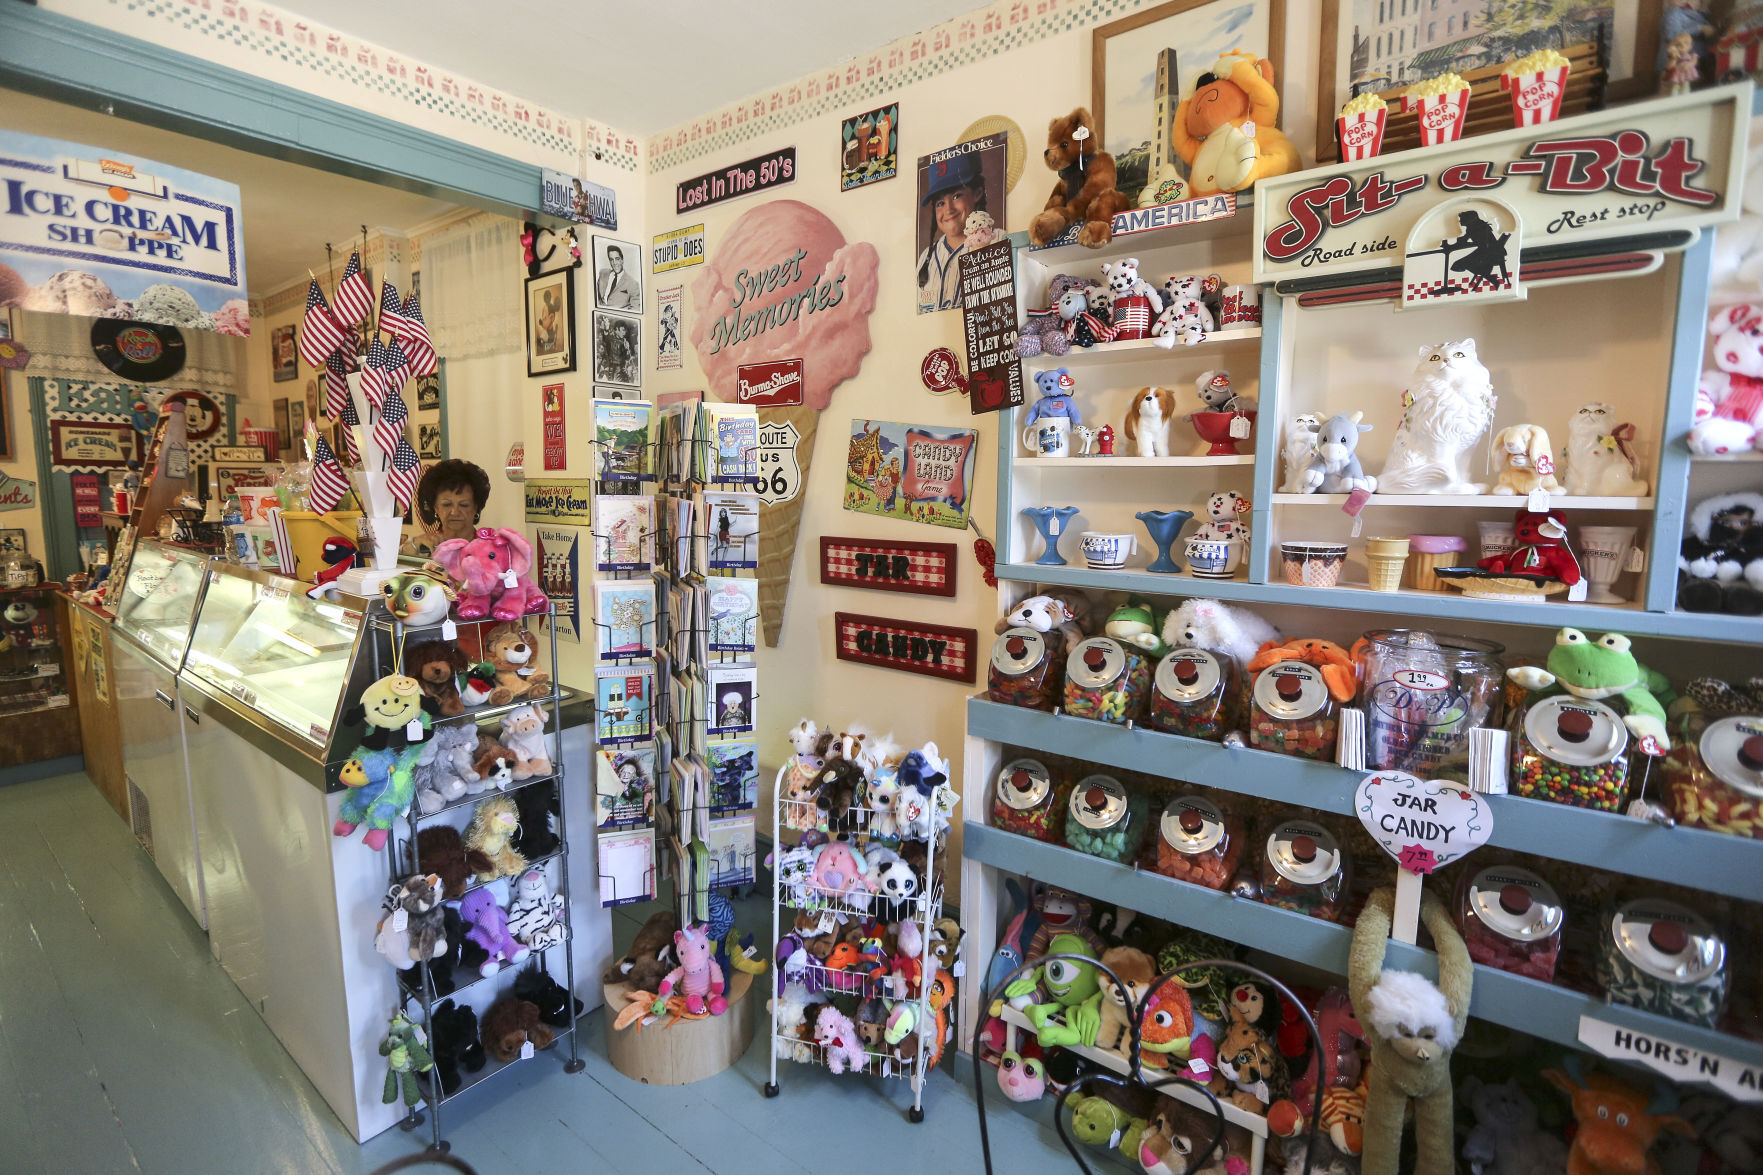 Inside view of Sweet Memories located in Cable Car Square on 4th Street in Dubuque.    PHOTO CREDIT: Dave Kettering